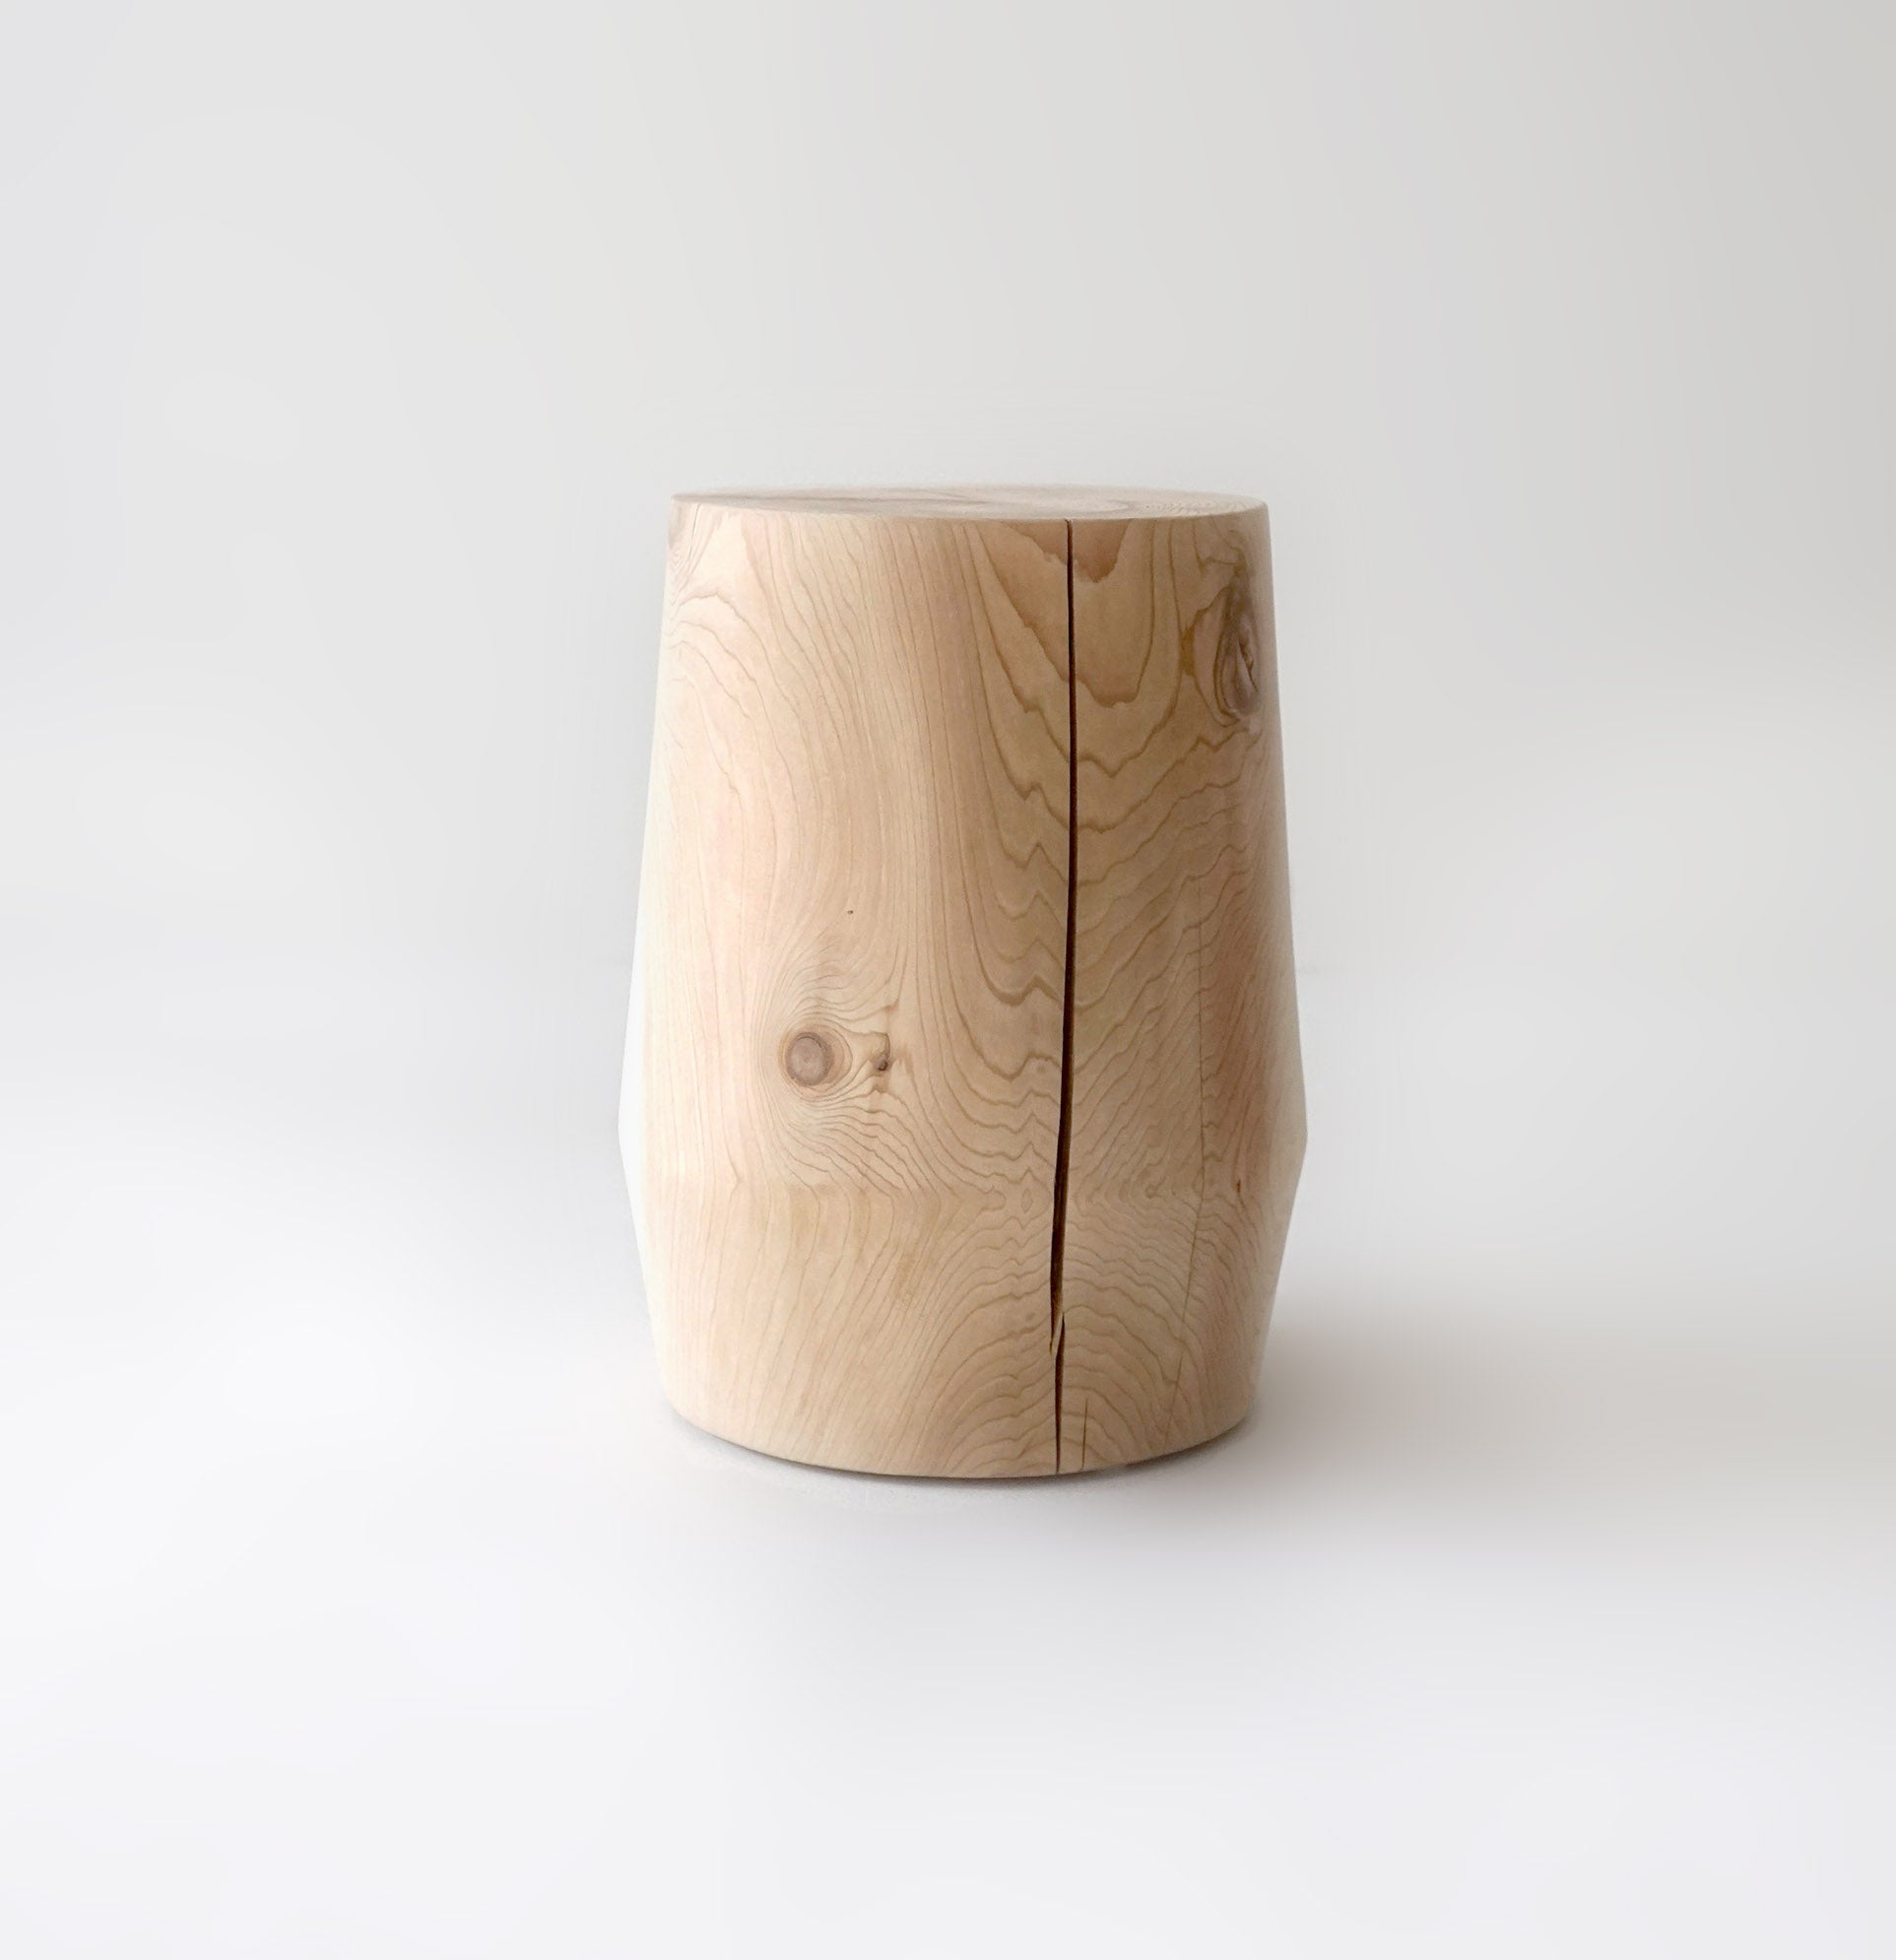 Solid hemlock smokestack stool with a crack